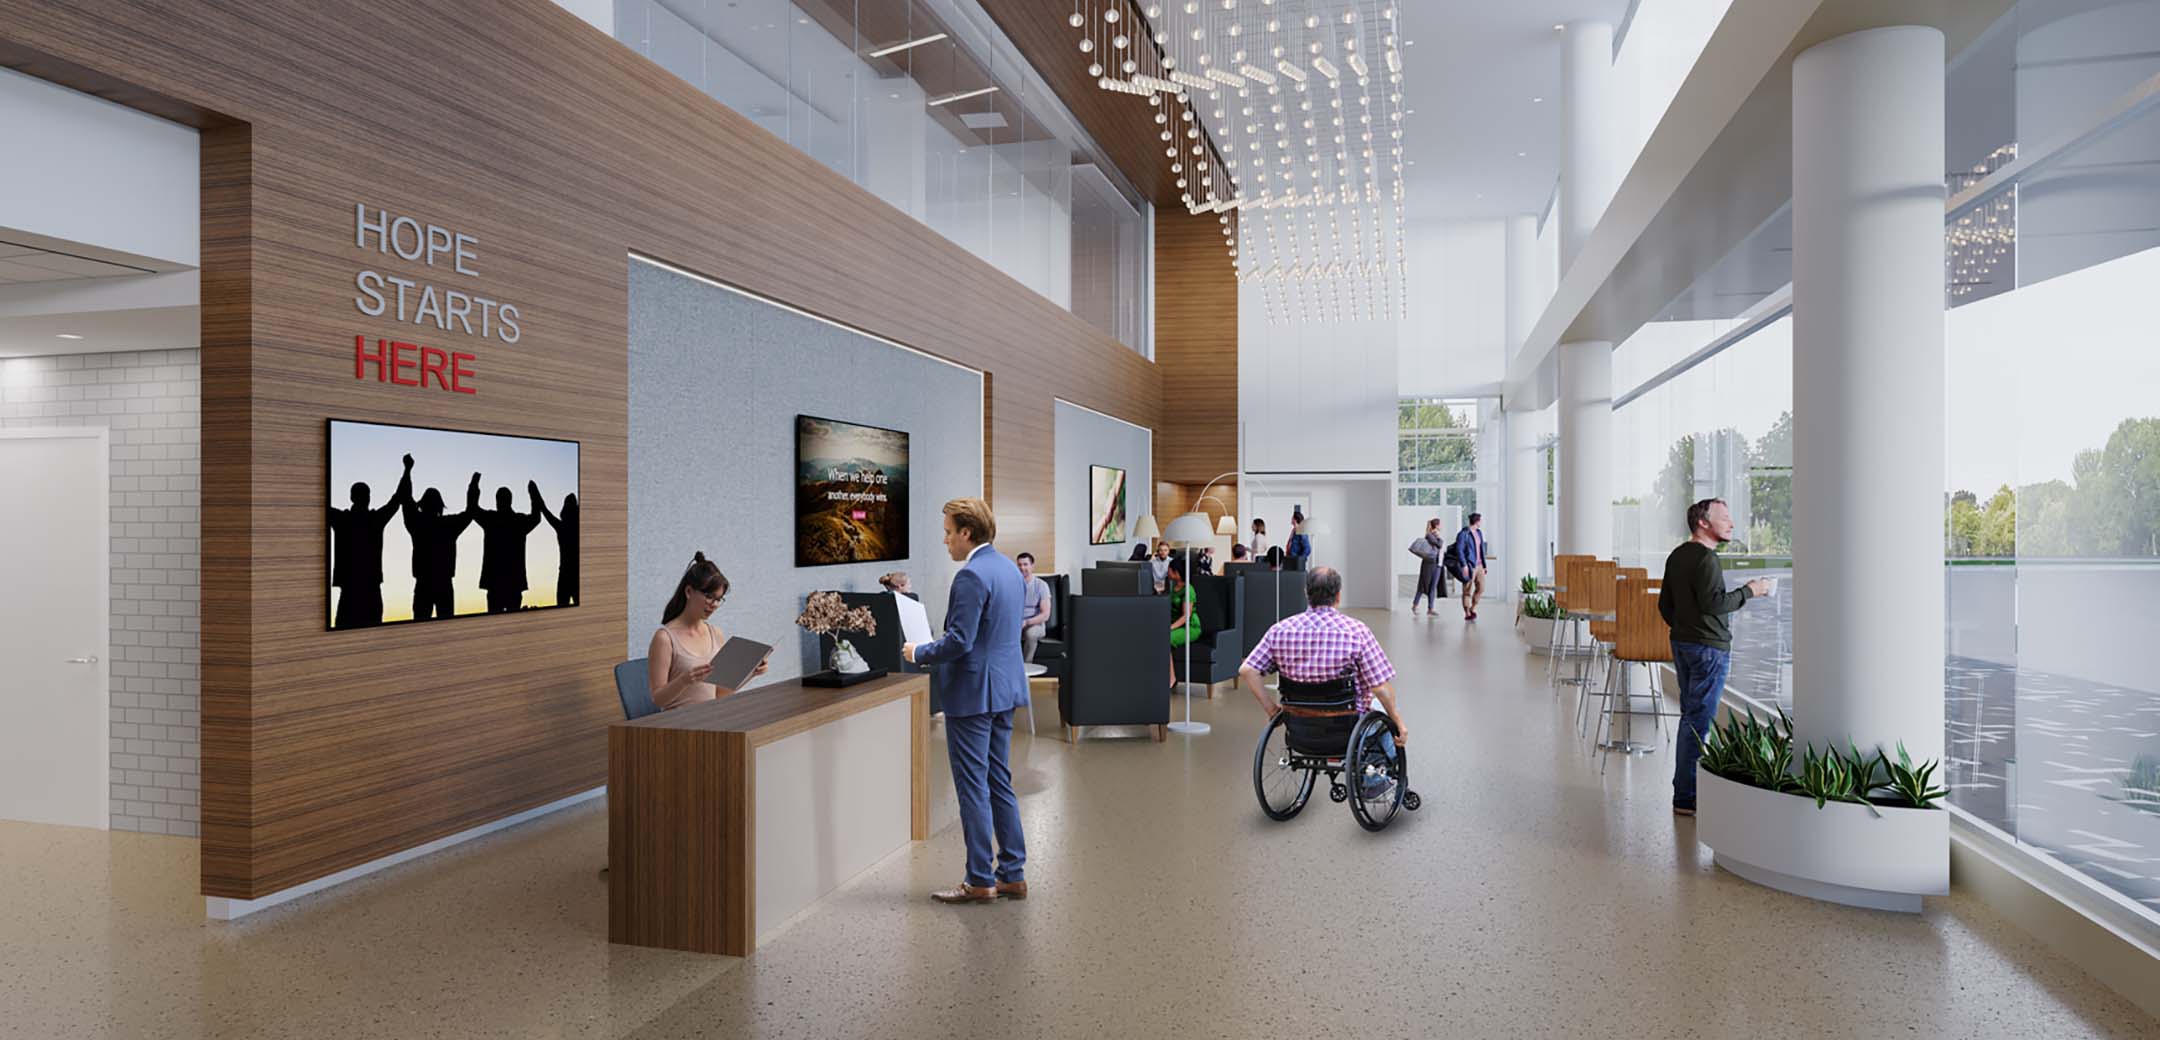 An interior render of the Good Shephard Rehab lobby and waiting area showcasing the wooden accents and glass windows looking outside.